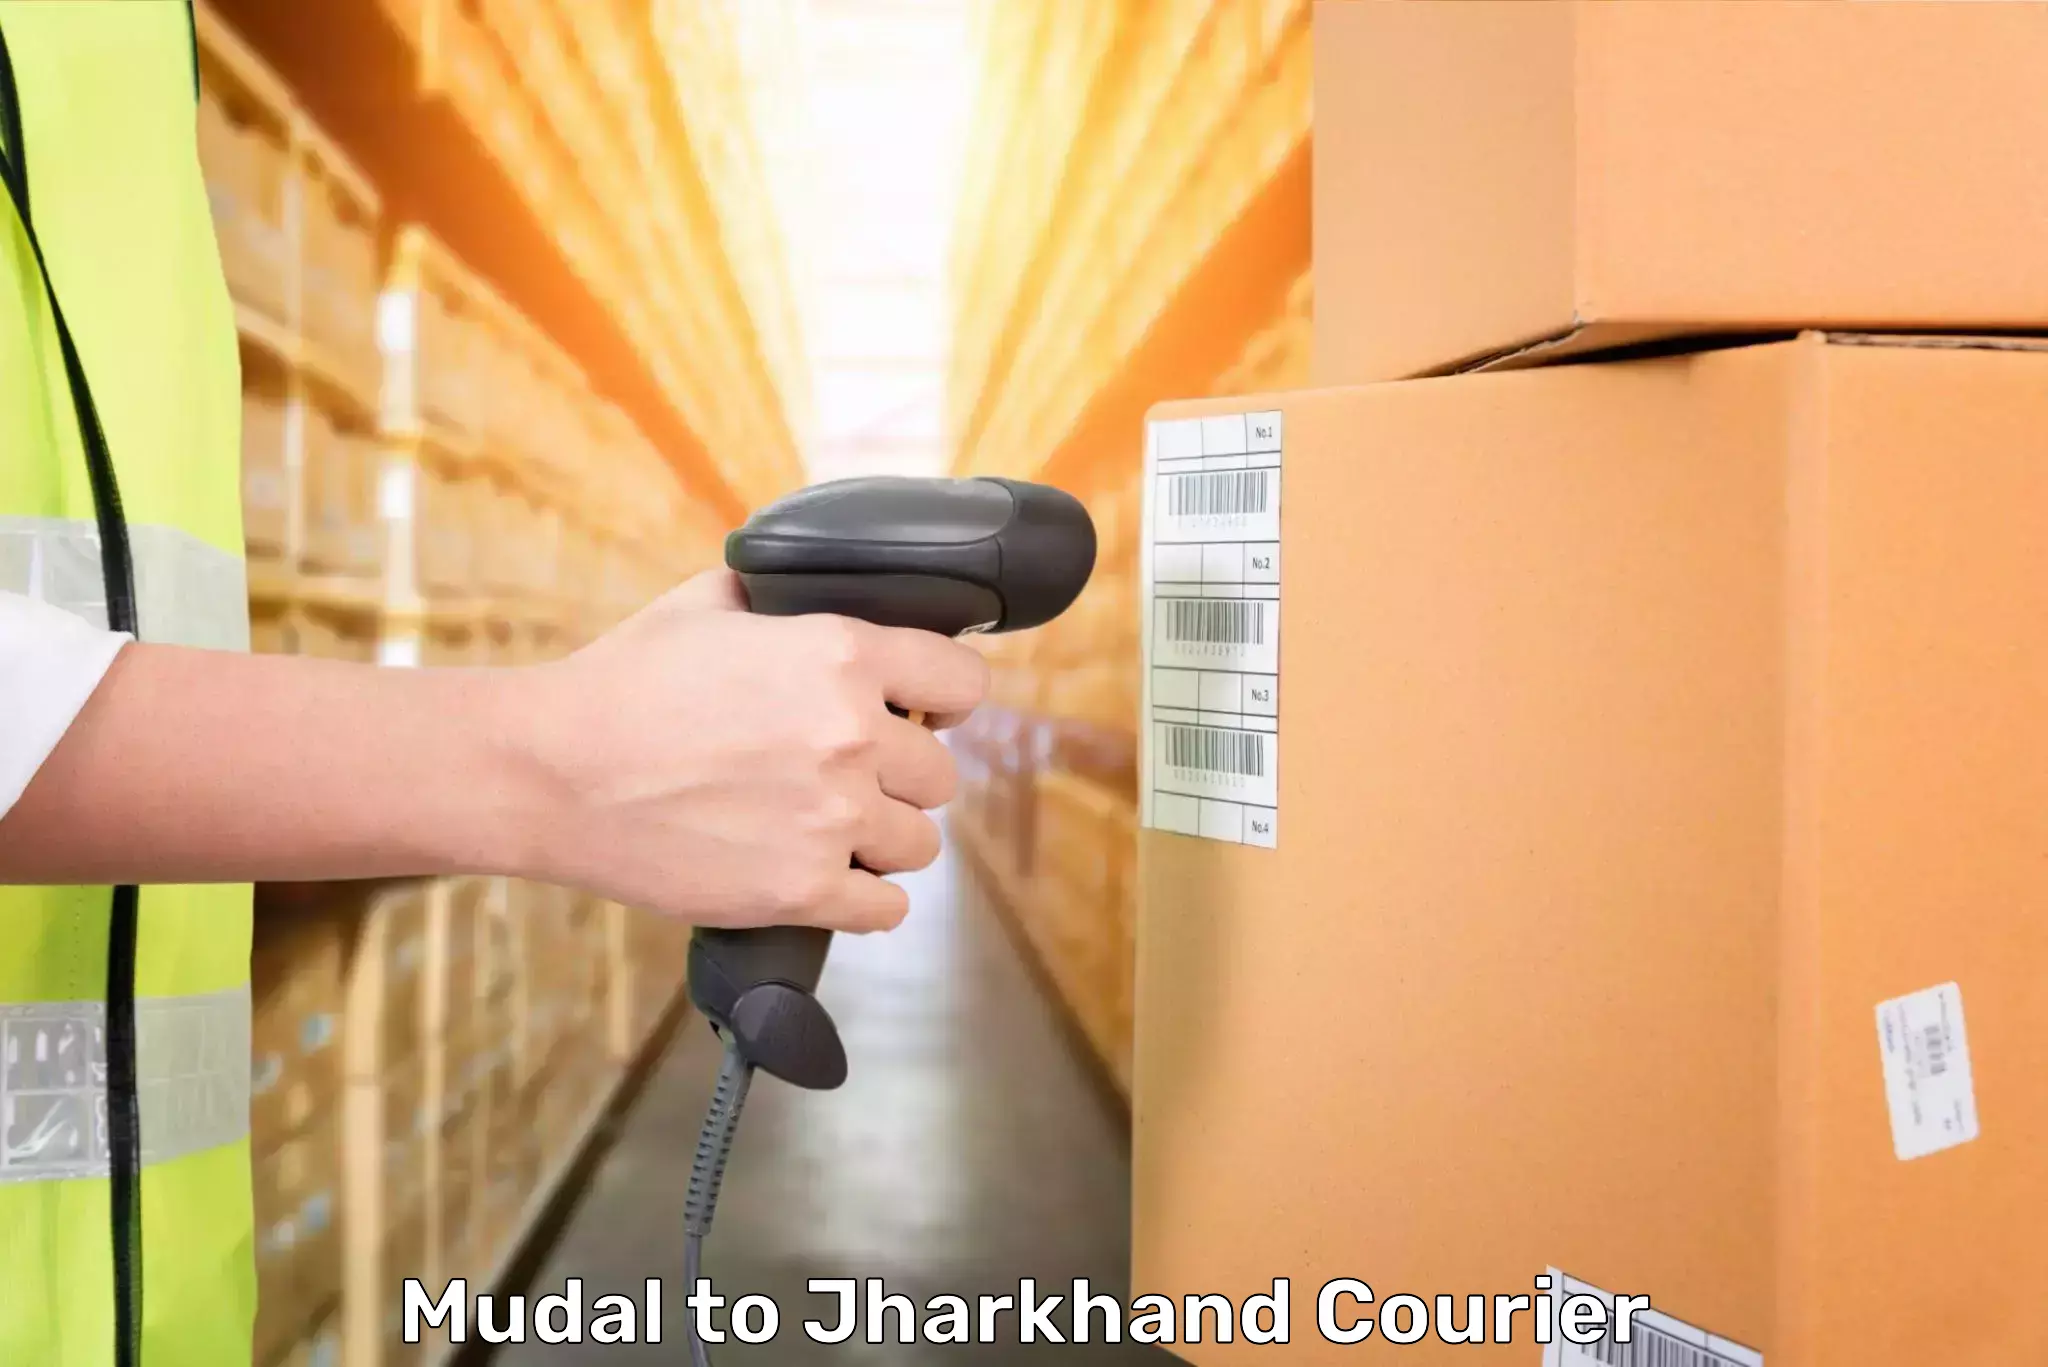 Luggage shipment tracking in Mudal to Jharkhand